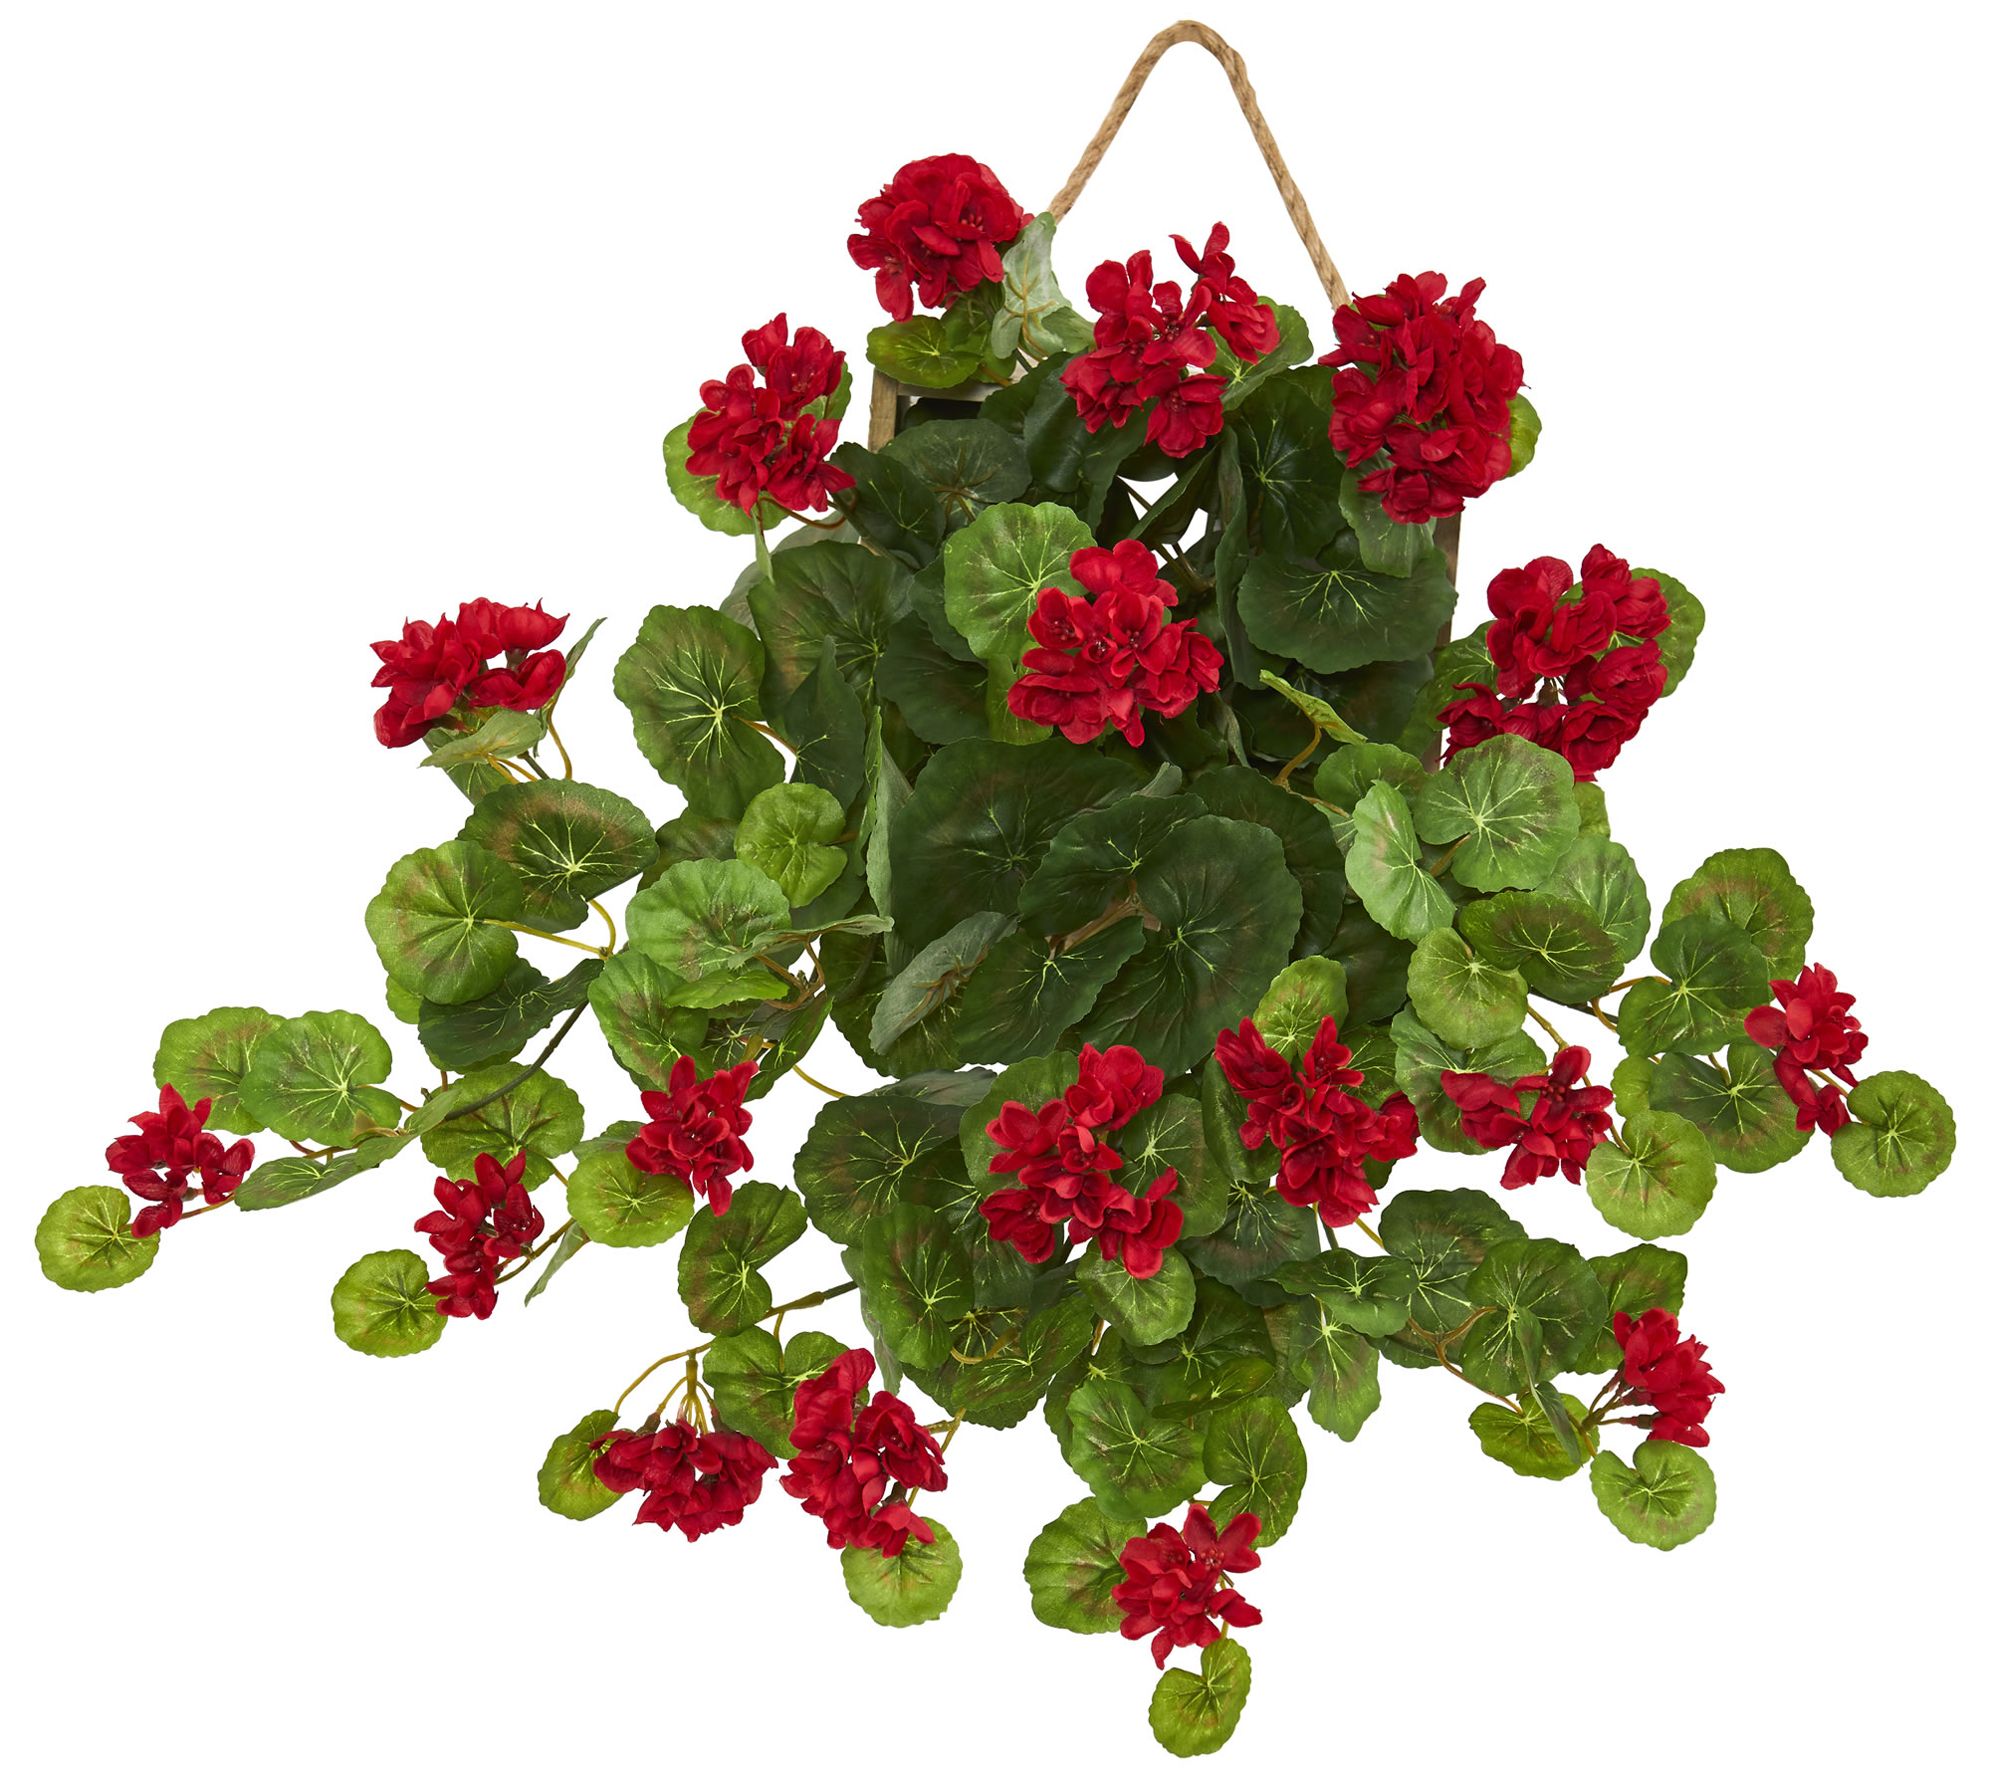 Geranium Plant in Decorative Hanging Frame by Nearly Natural - QVC.com